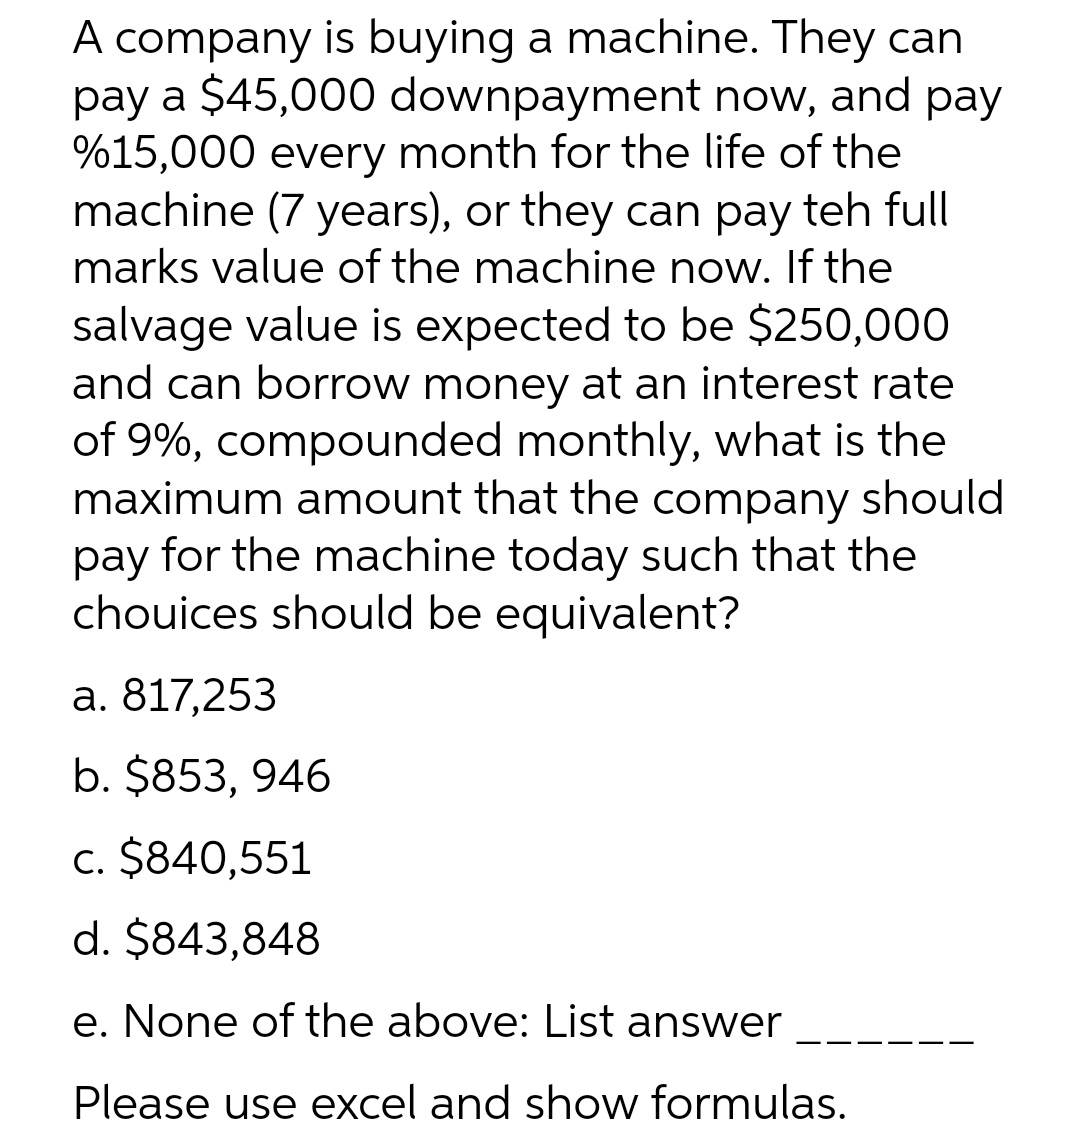 A company is buying a machine. They can
pay a $45,000 downpayment now, and pay
%15,000 every month for the life of the
machine (7 years), or they can pay teh full
marks value of the machine now. If the
salvage value is expected to be $250,000
and can borrow money at an interest rate
of 9%, compounded monthly, what is the
maximum amount that the company should
pay for the machine today such that the
chouices should be equivalent?
а. 817,253
b. $853, 946
c. $840,551
d. $843,848
e. None of the above: List answer
Please use excel and show formulas.
